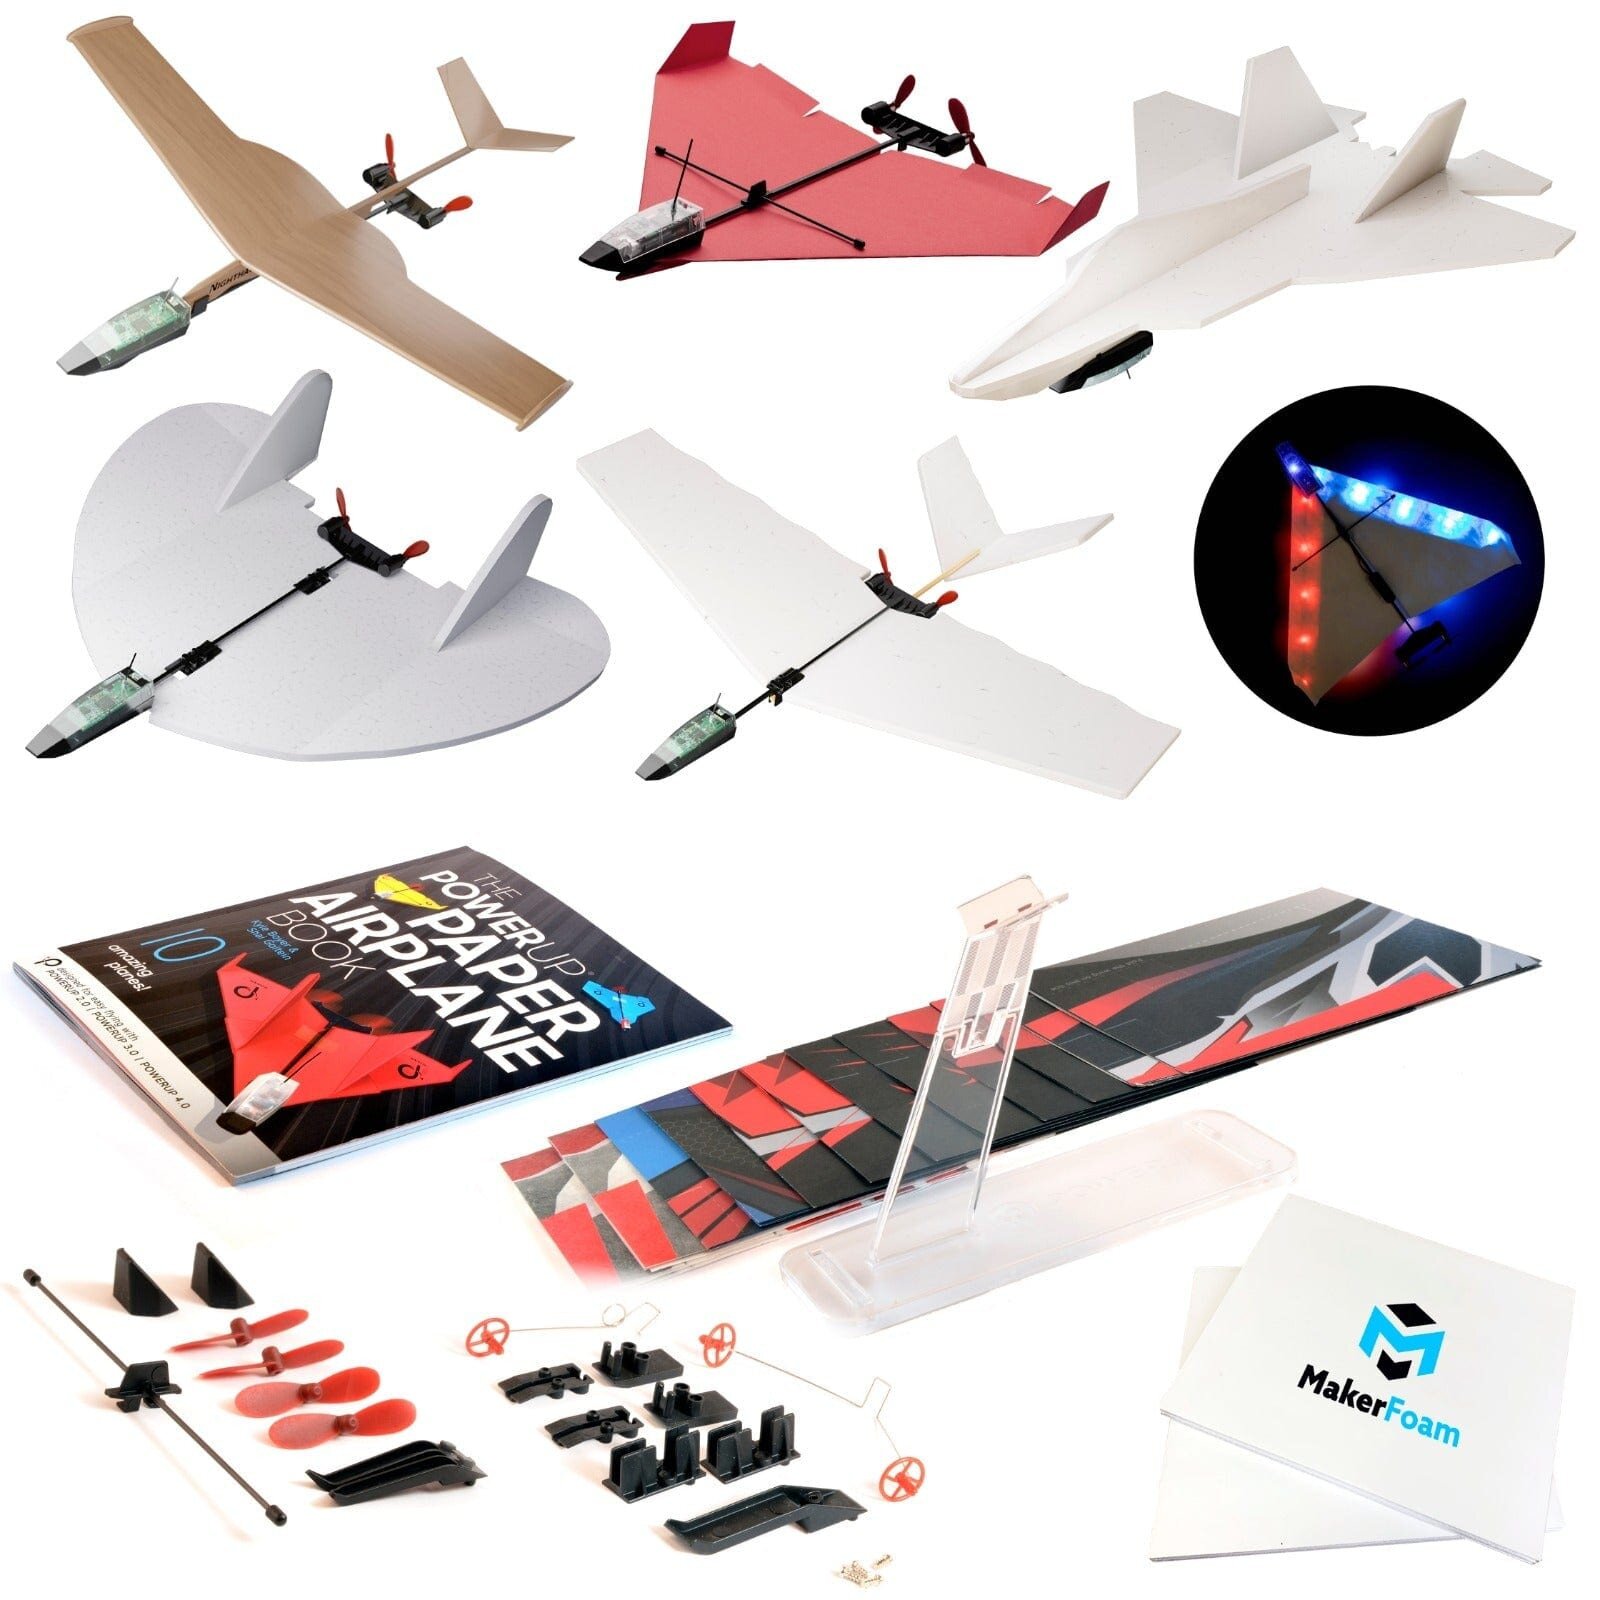 POWERUP 4.0 smartphone controlled paper airplane kit review